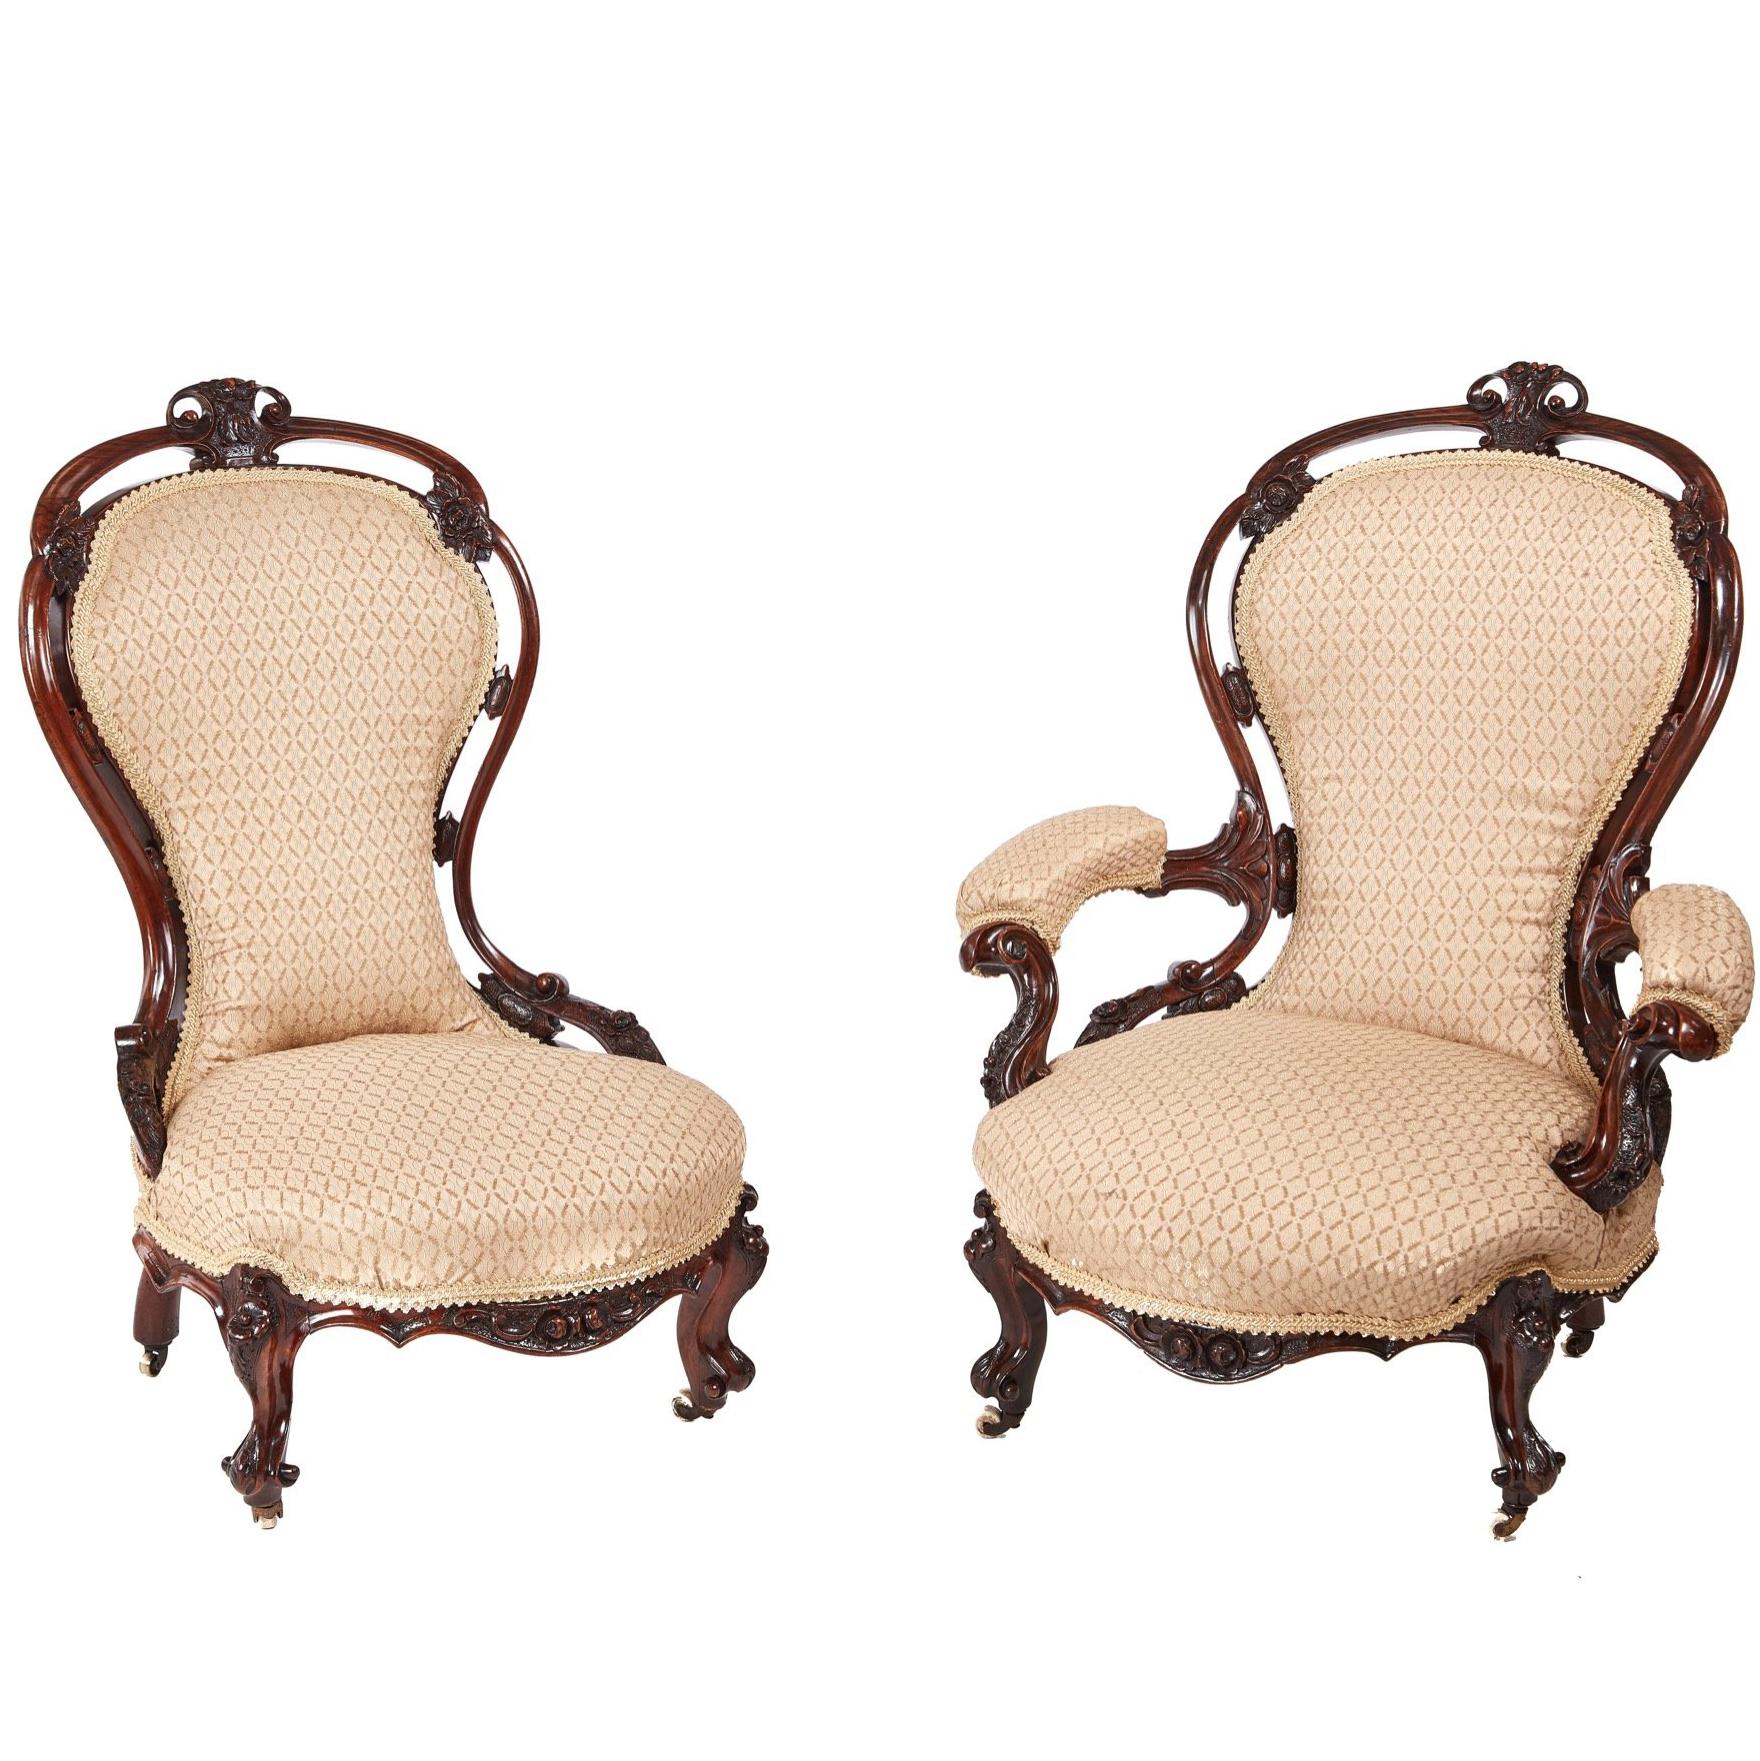 Outstanding Pair of Victorian Carved Walnut Chairs For Sale